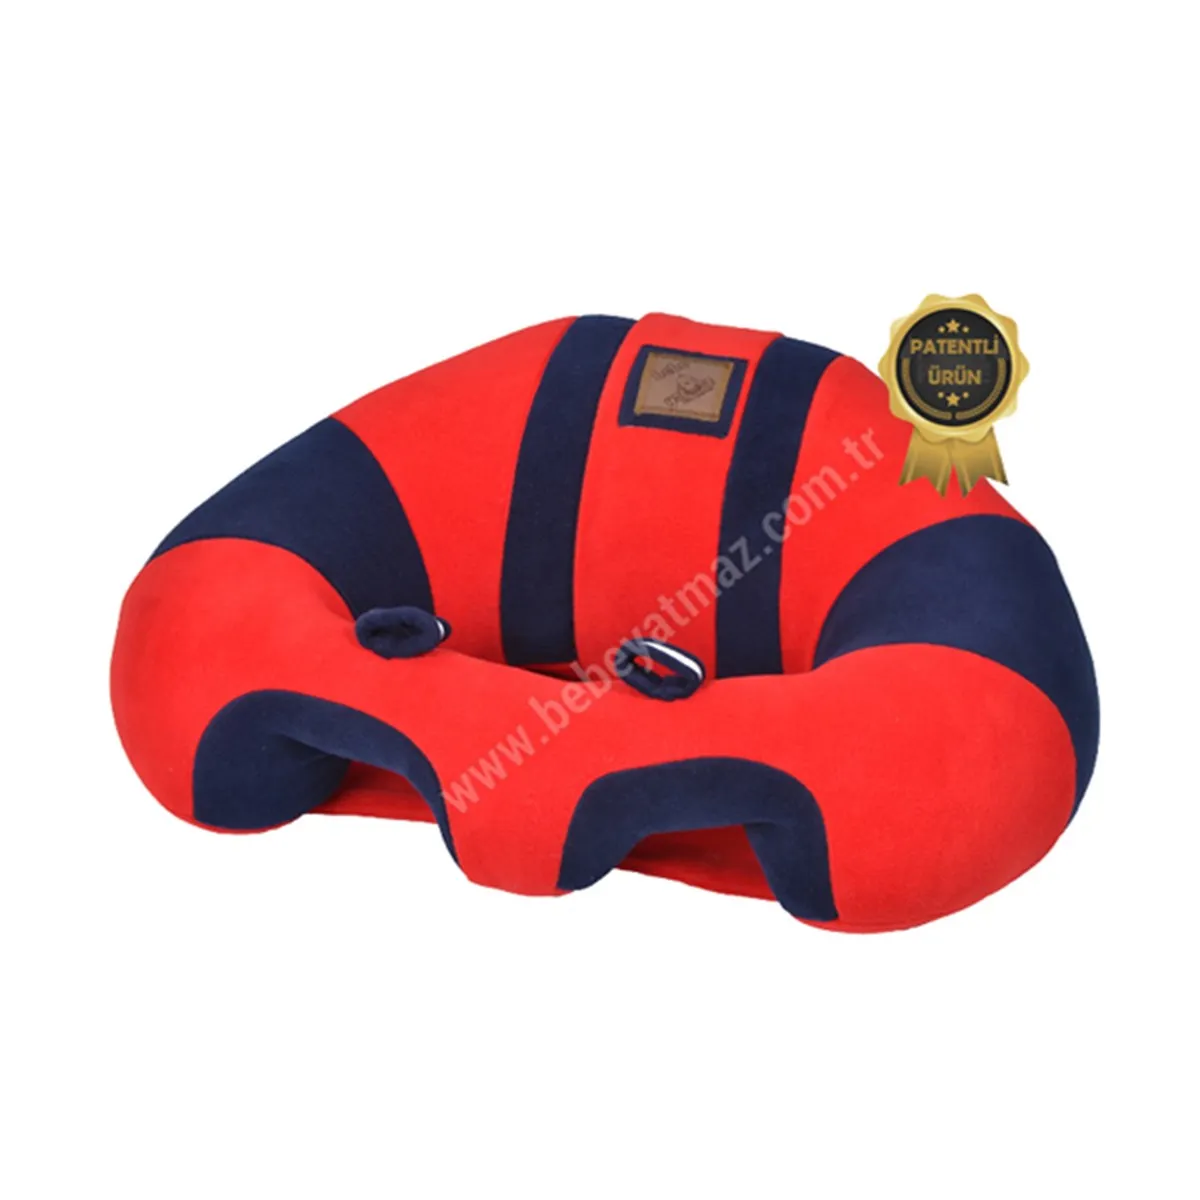 Jaju Baby Red-Navy Blue Luxury Baby Support Cushion